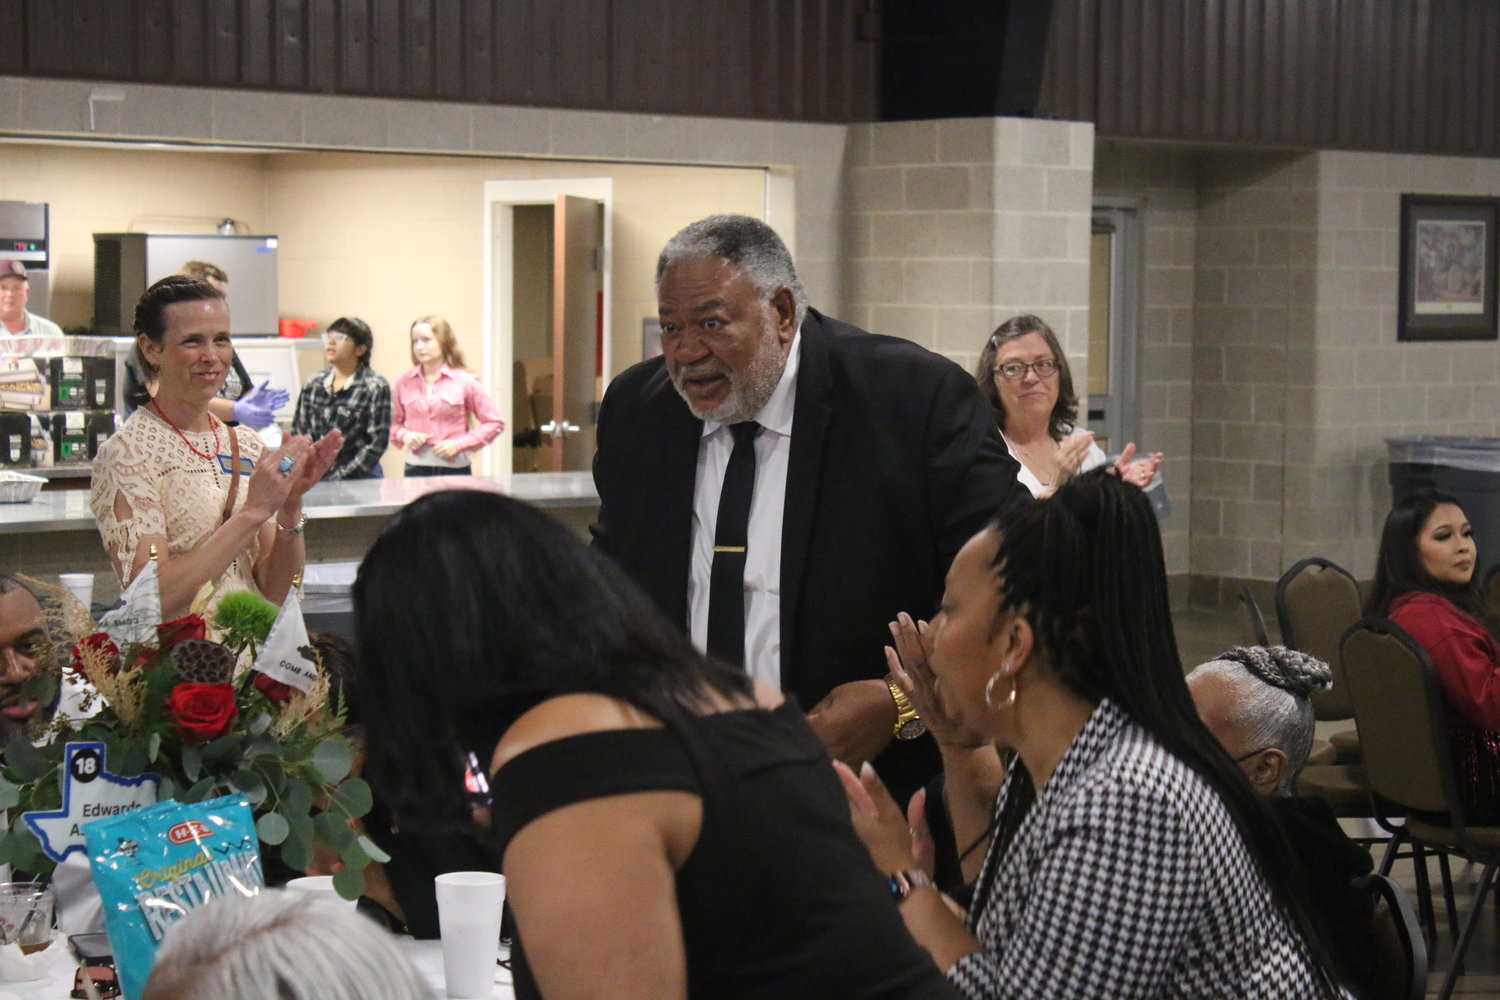 Chamber executive director Melissa Henderson, left, applauds Edwards Association president David Tucy, who stands after being named the Community Service Award winner. Tucy quoted MLK in describing how anyone can be called to service.